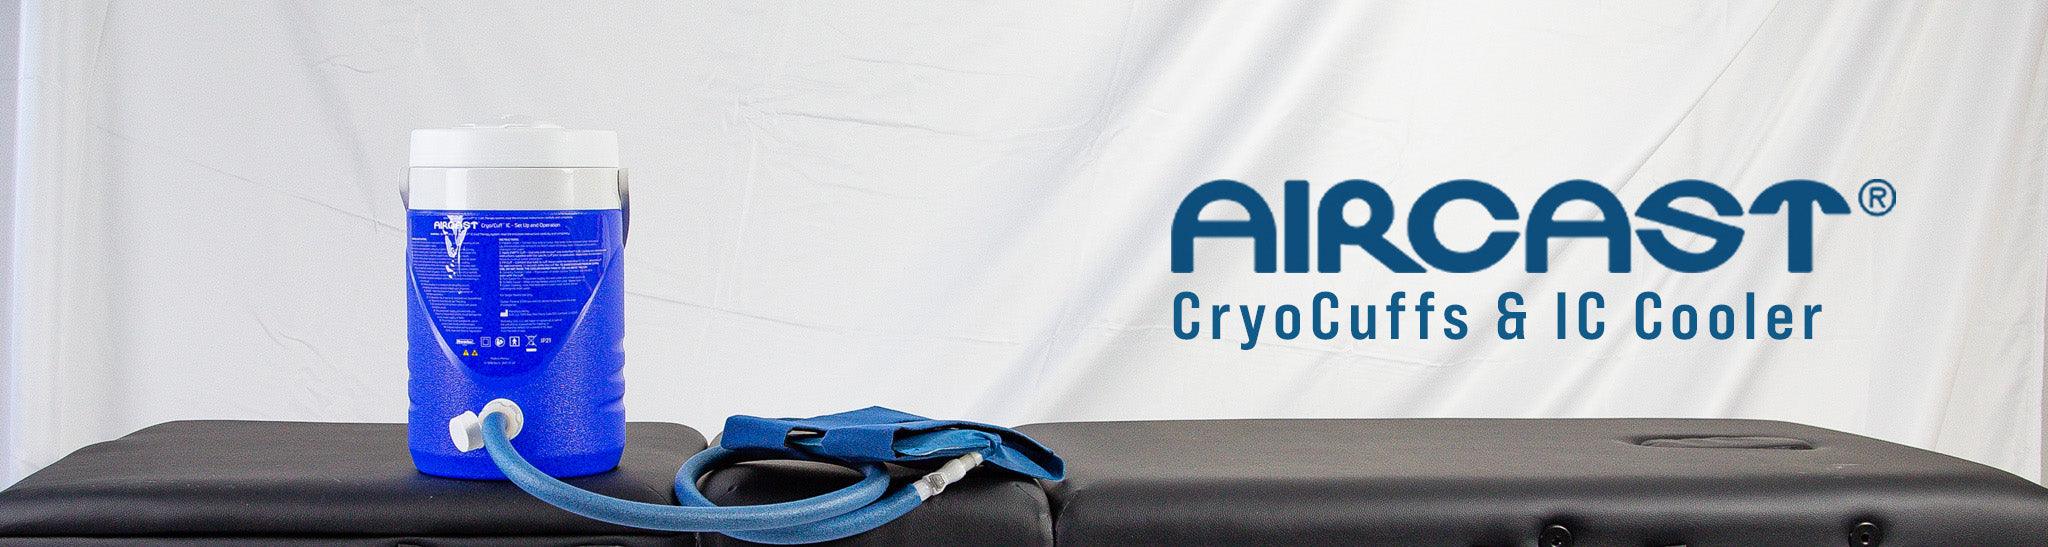 Aircast® Cryo Cuffs & IC Coolers images by Supply Physical Therapy